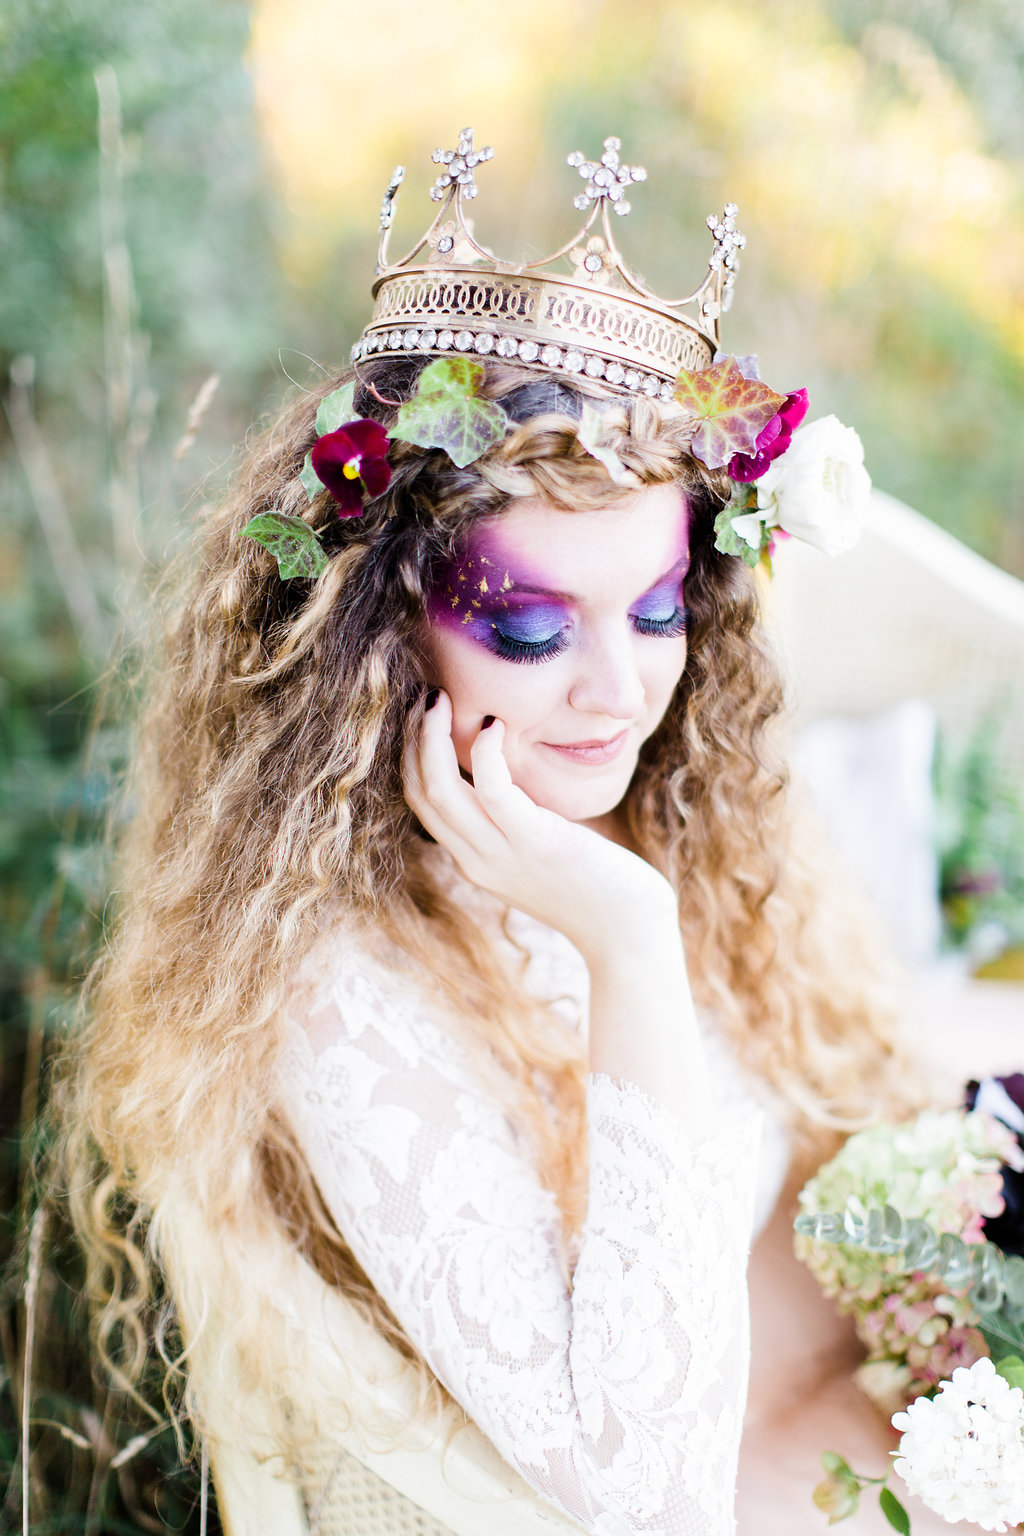 Halloween Bride | The Day's Design | Ashley Slater Photography